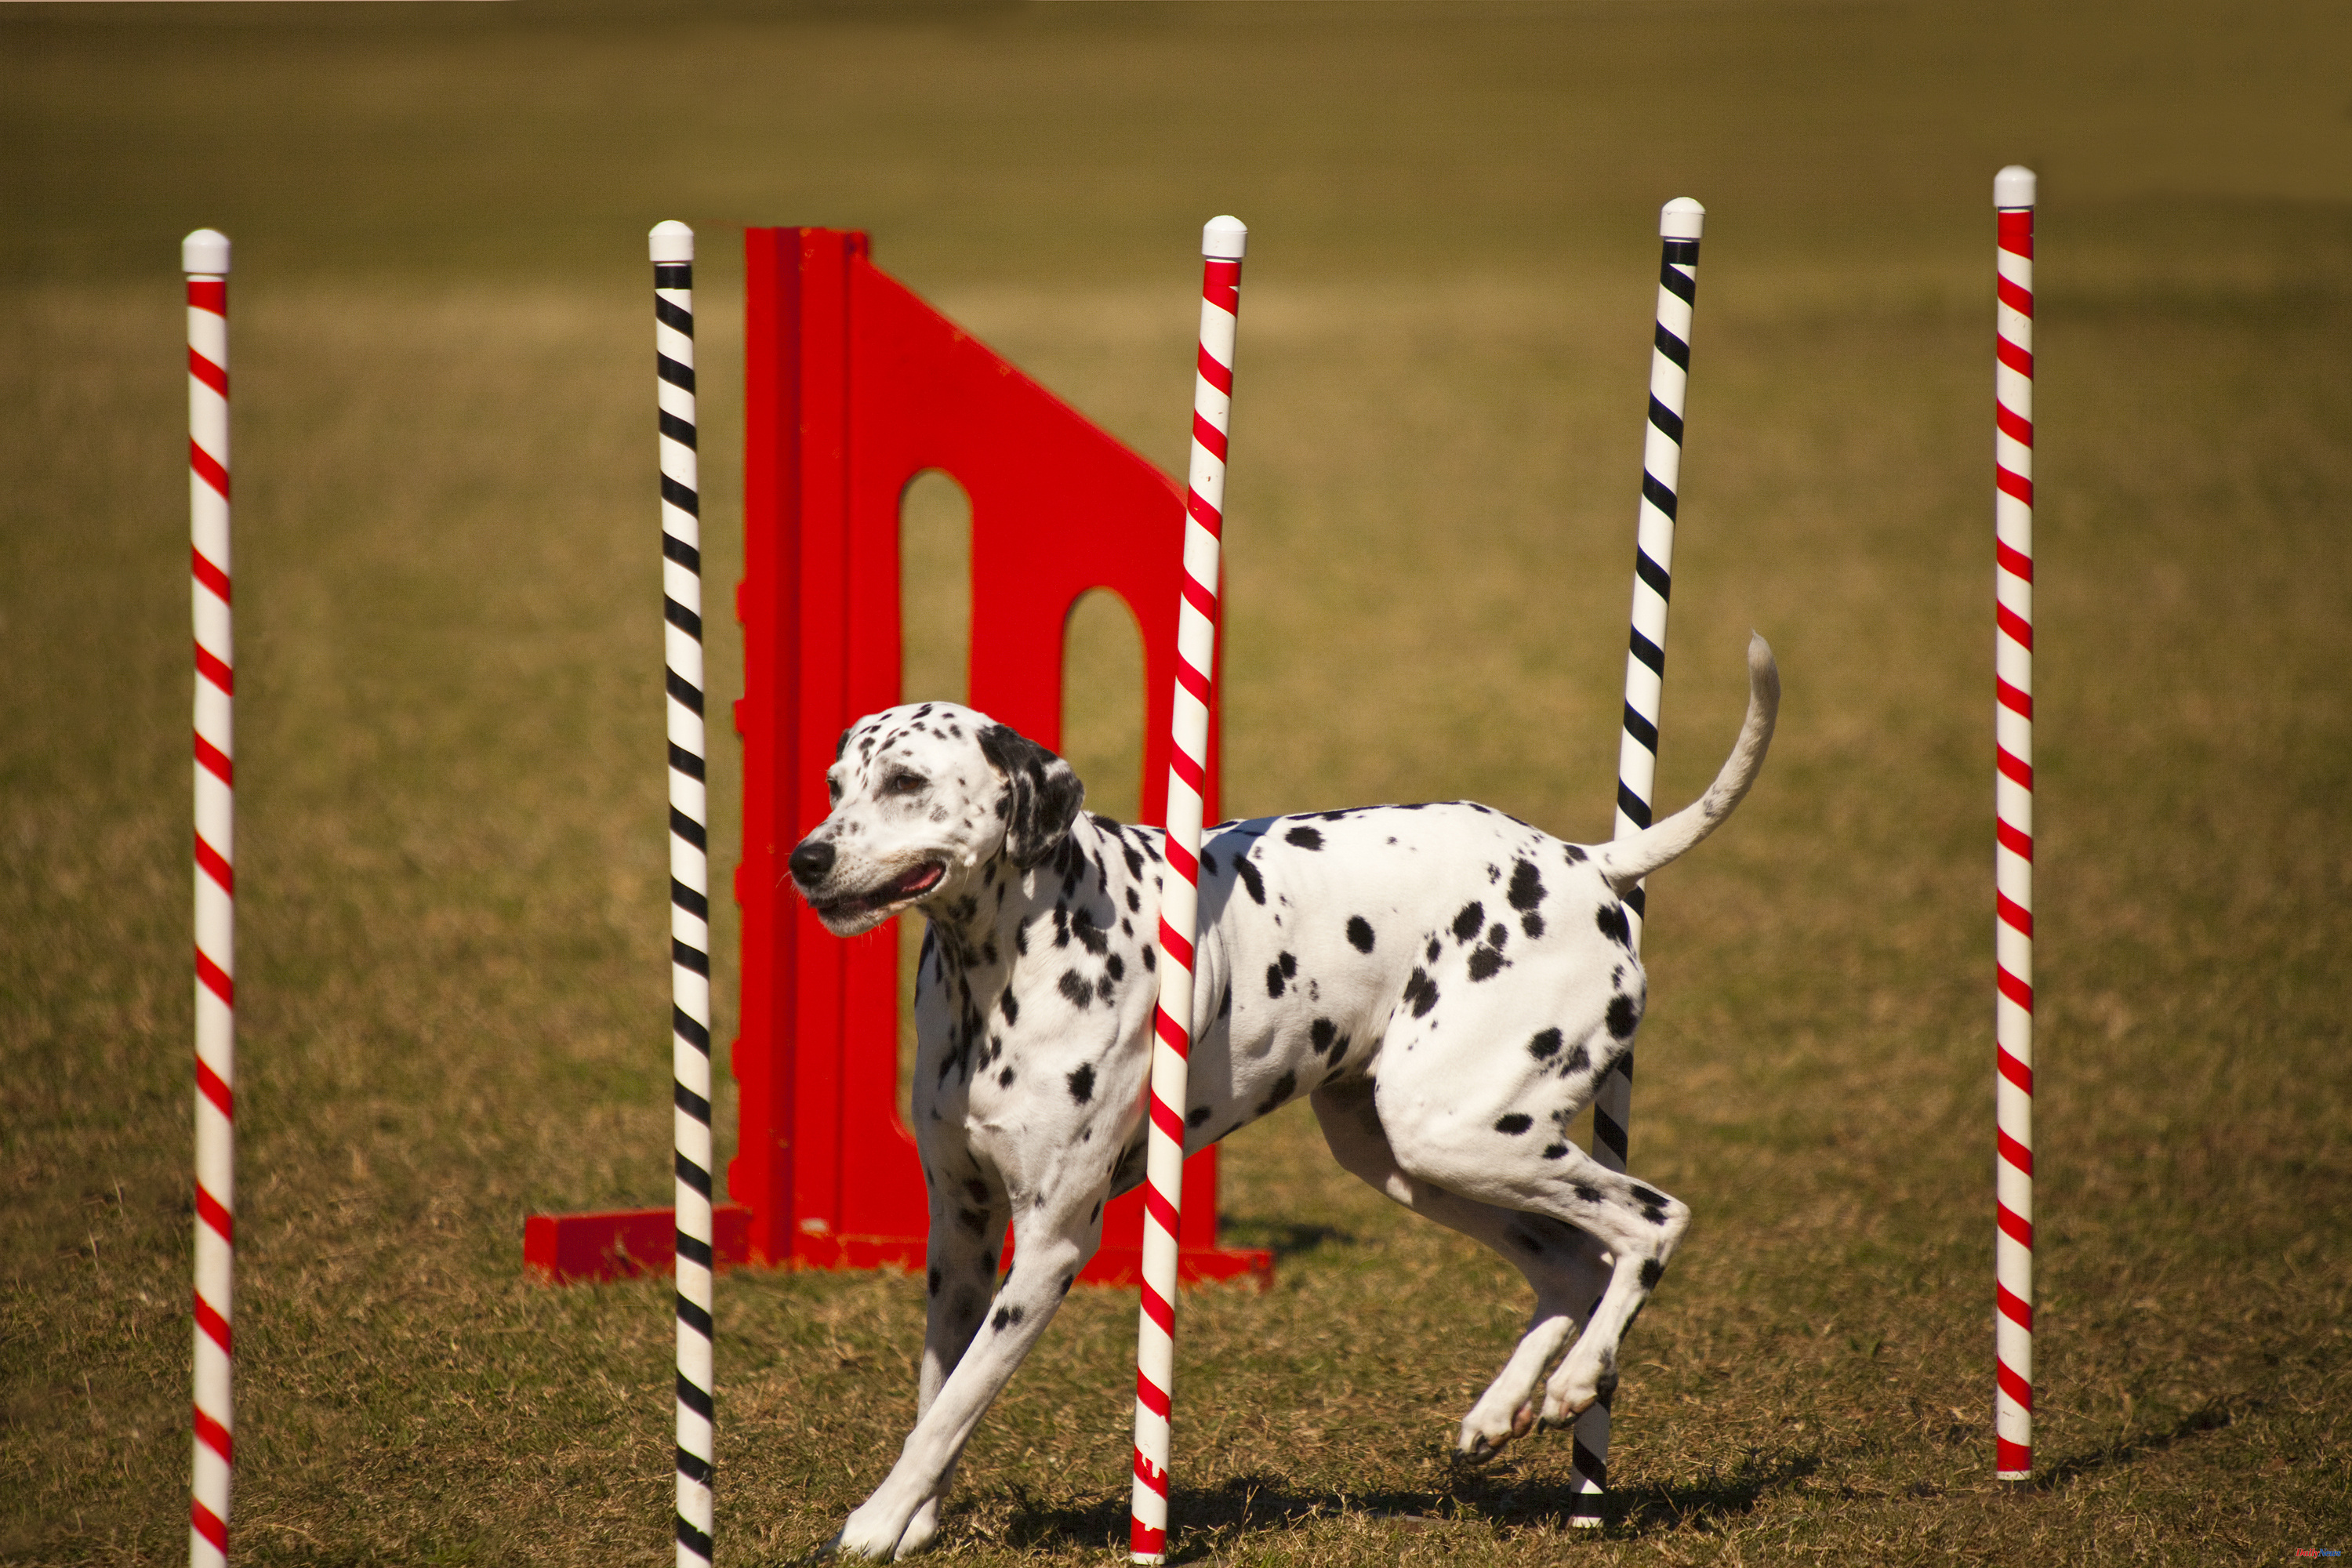 Spain Animal Welfare Law: if I already have a dog, do I have to take the course?